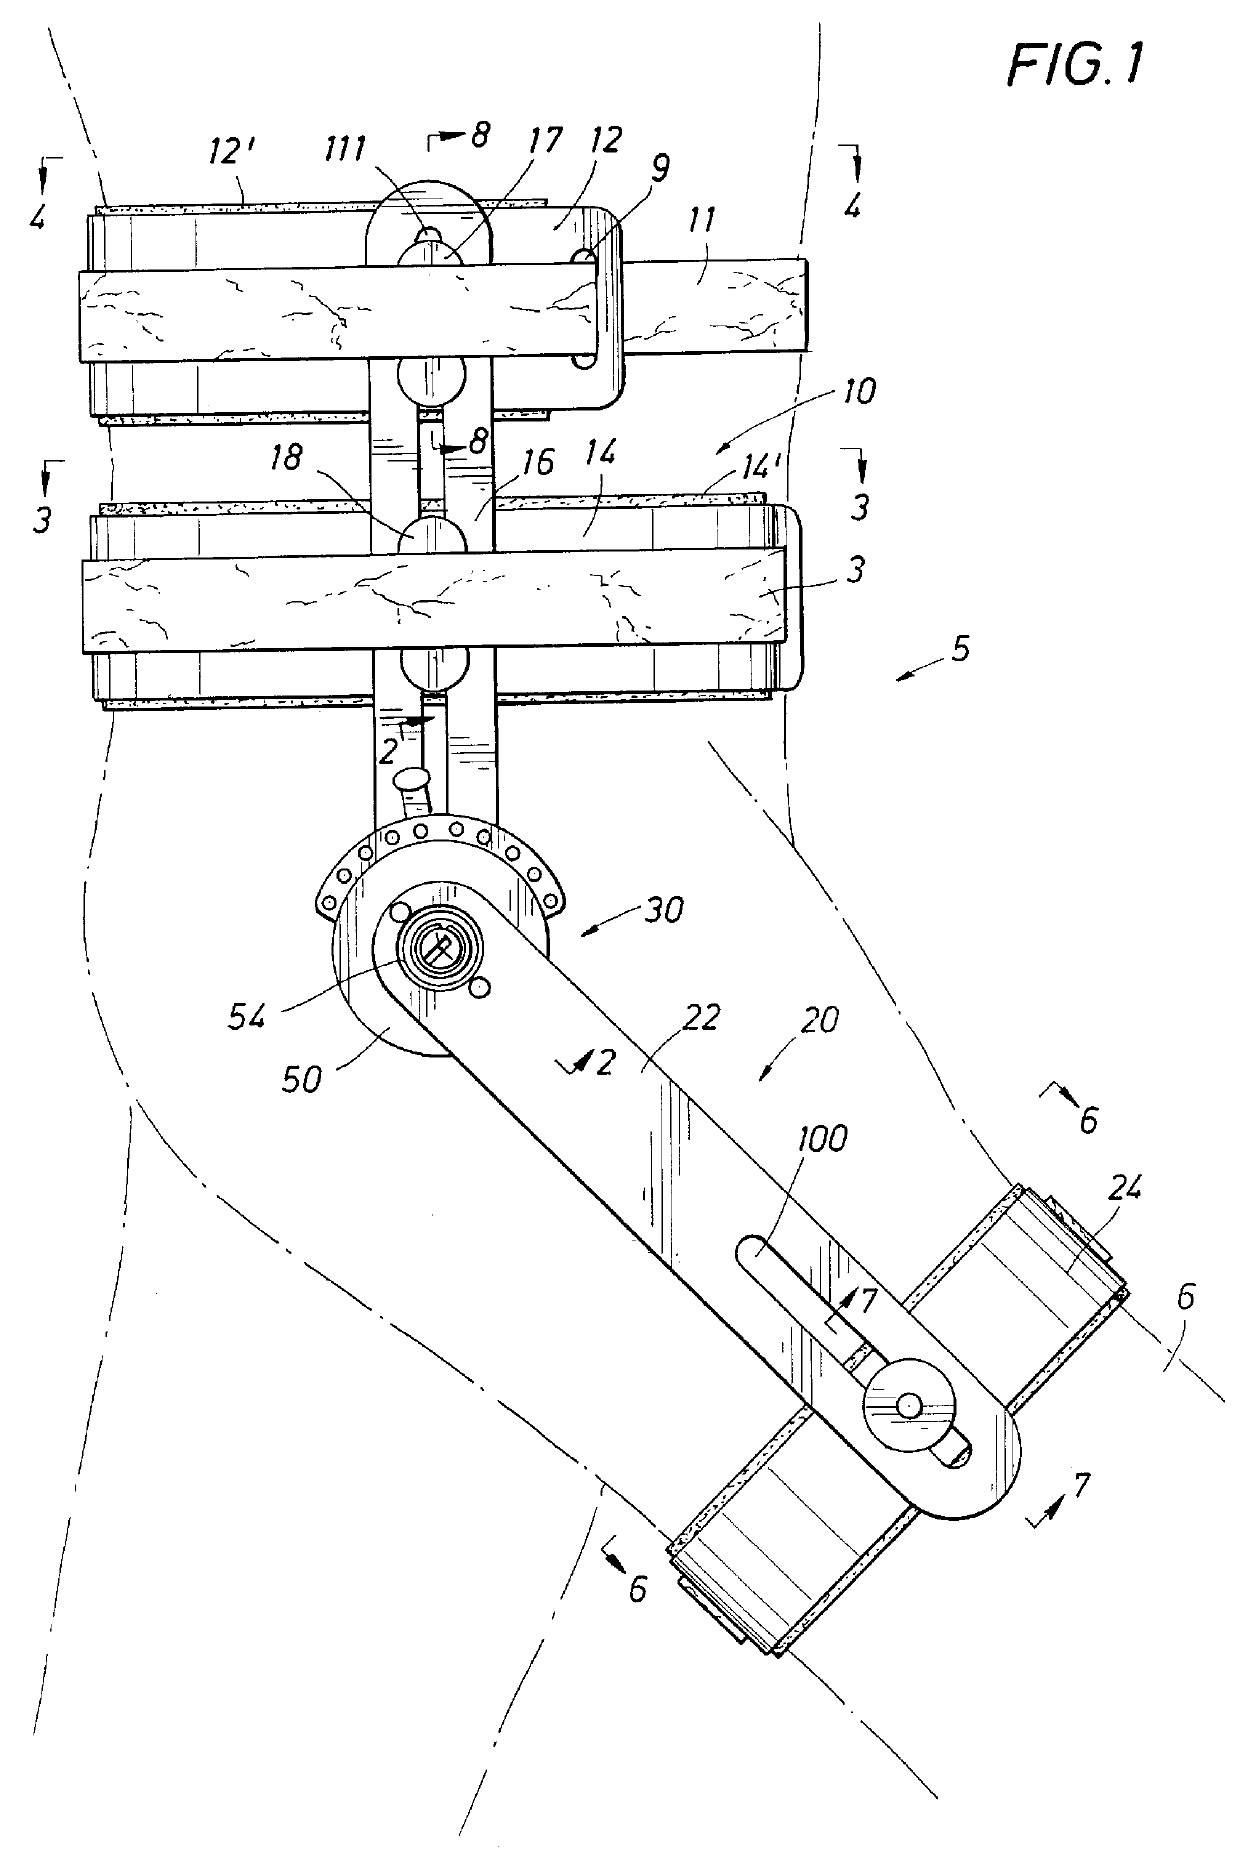 Pelvic support and walking assistance device